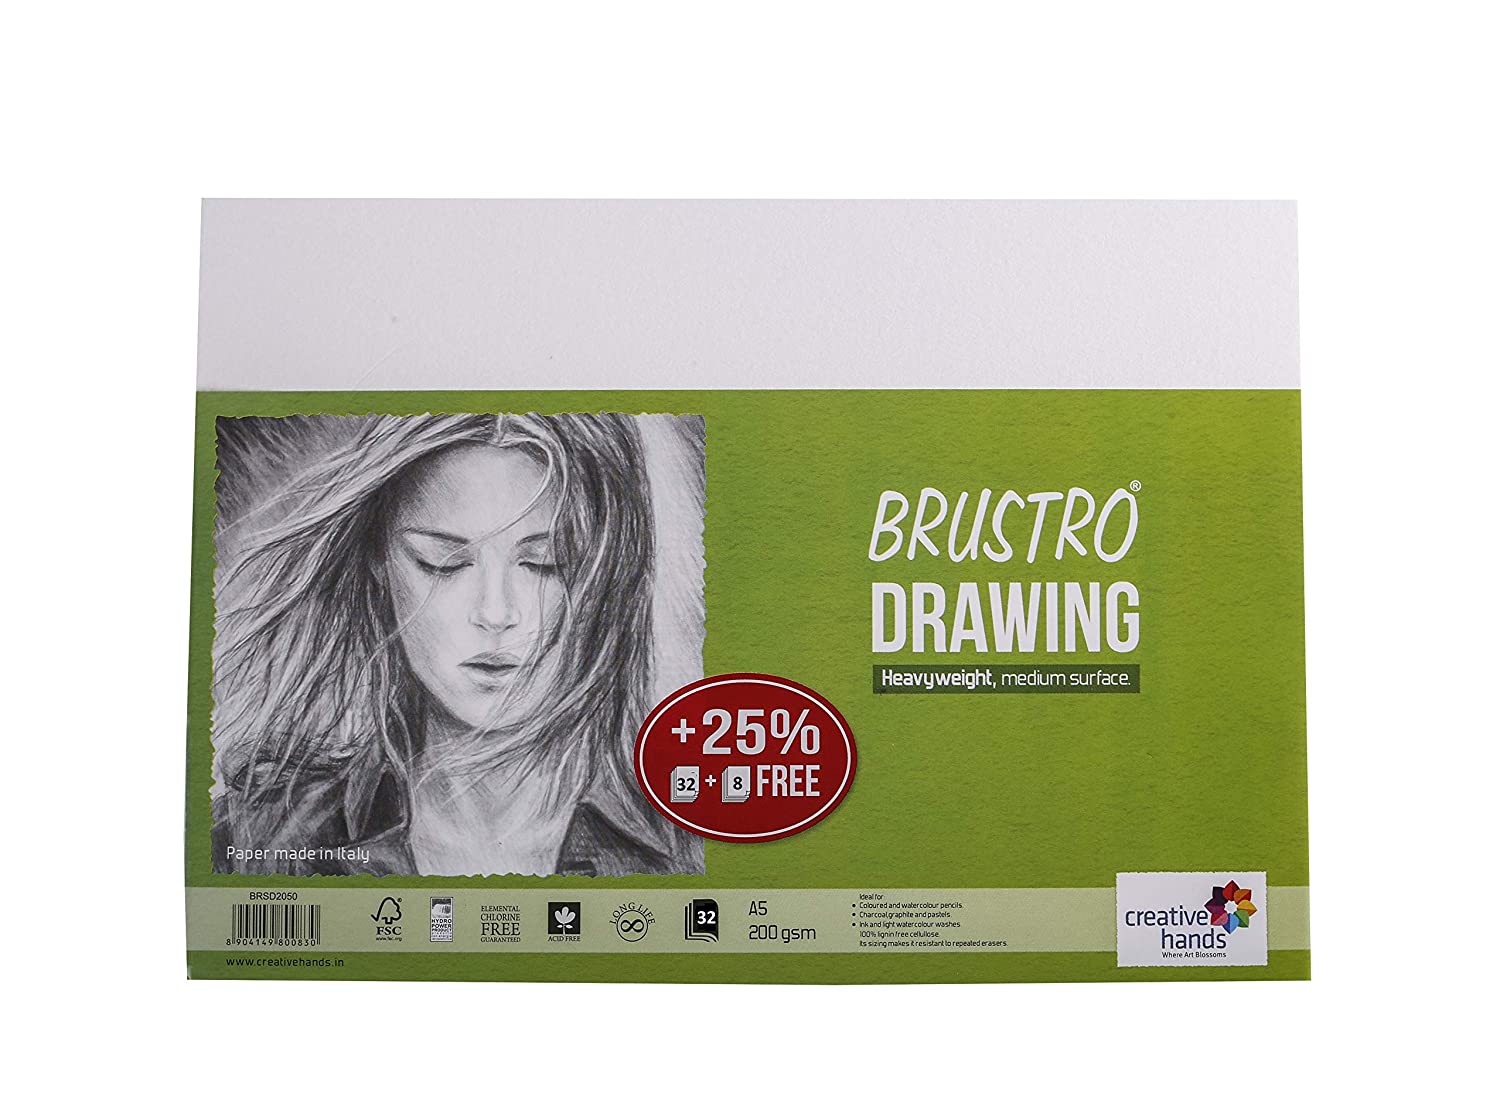 Brustro Sketching and Drawing Papers 200 GSM A5, 32 + 8 Free Sheets 